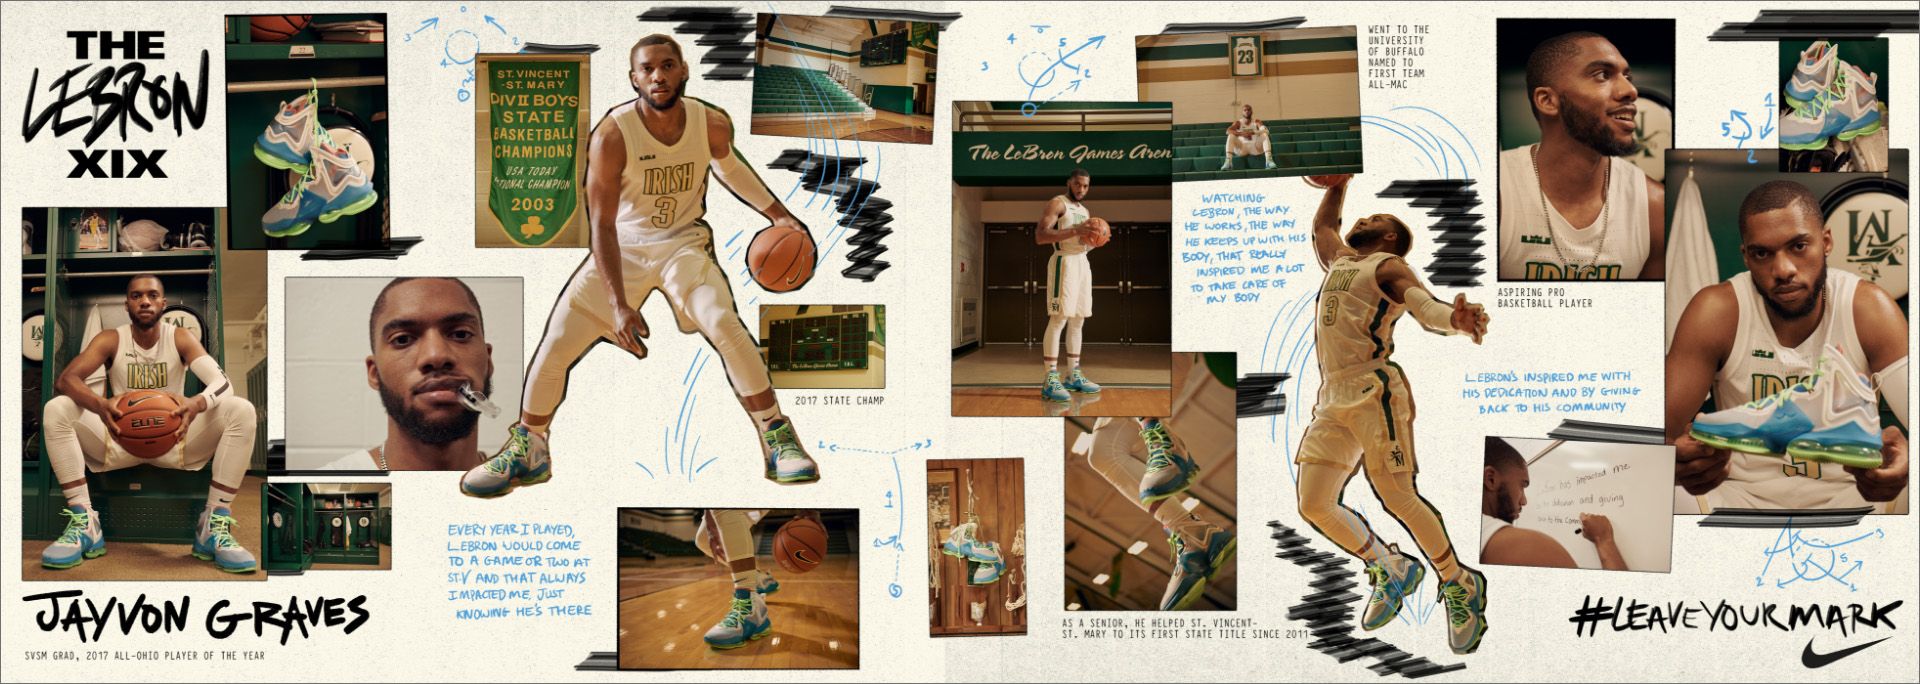 Collage of Javon Graves images and notes around the Lebron XIX shoe and notes on Lebron's impact on him.